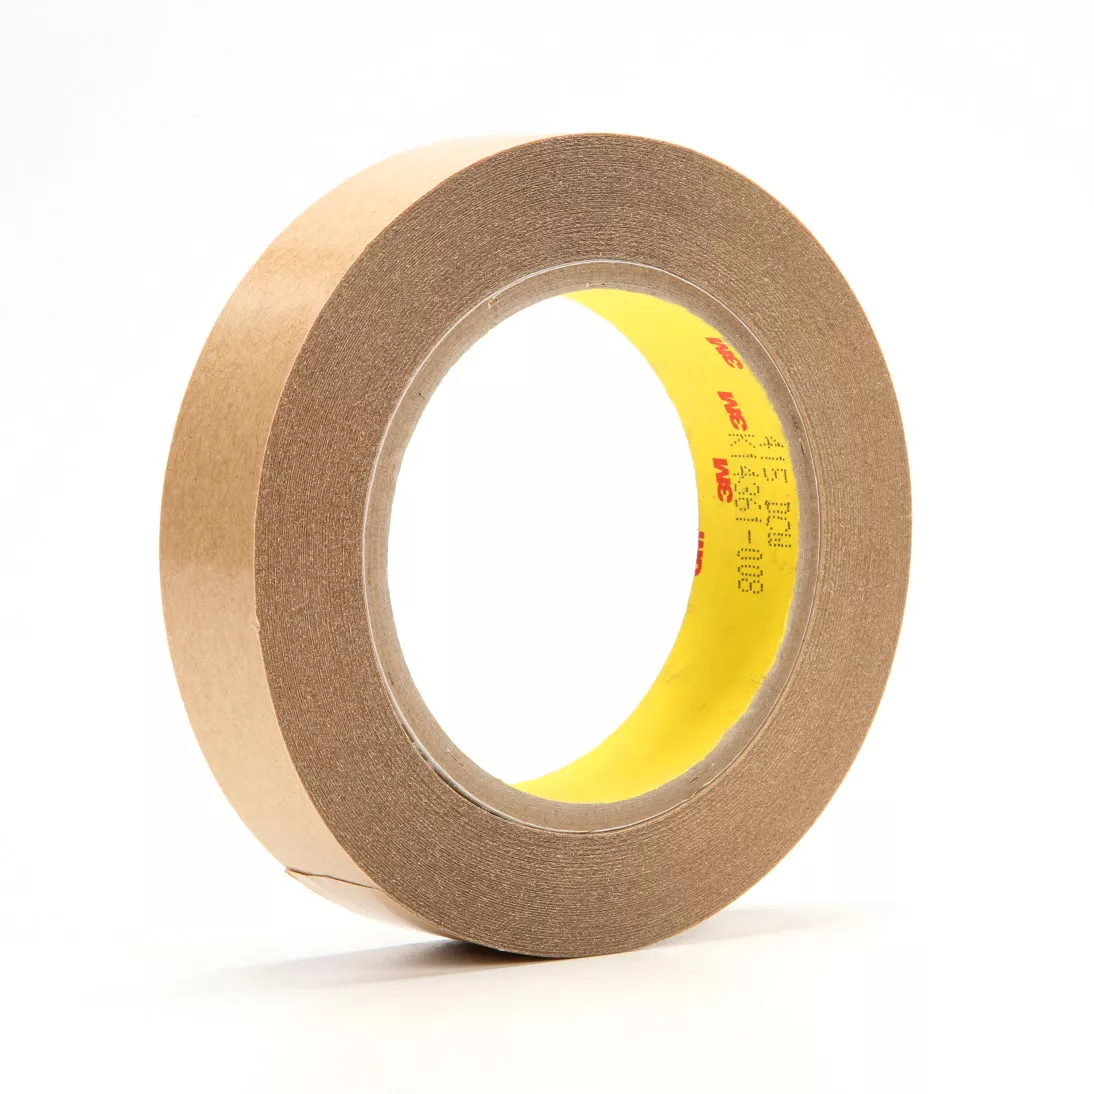 3M™ Double Coated Tape 415, Clear, 1 in x 36 yd, 4 mil, 36 rolls per
case